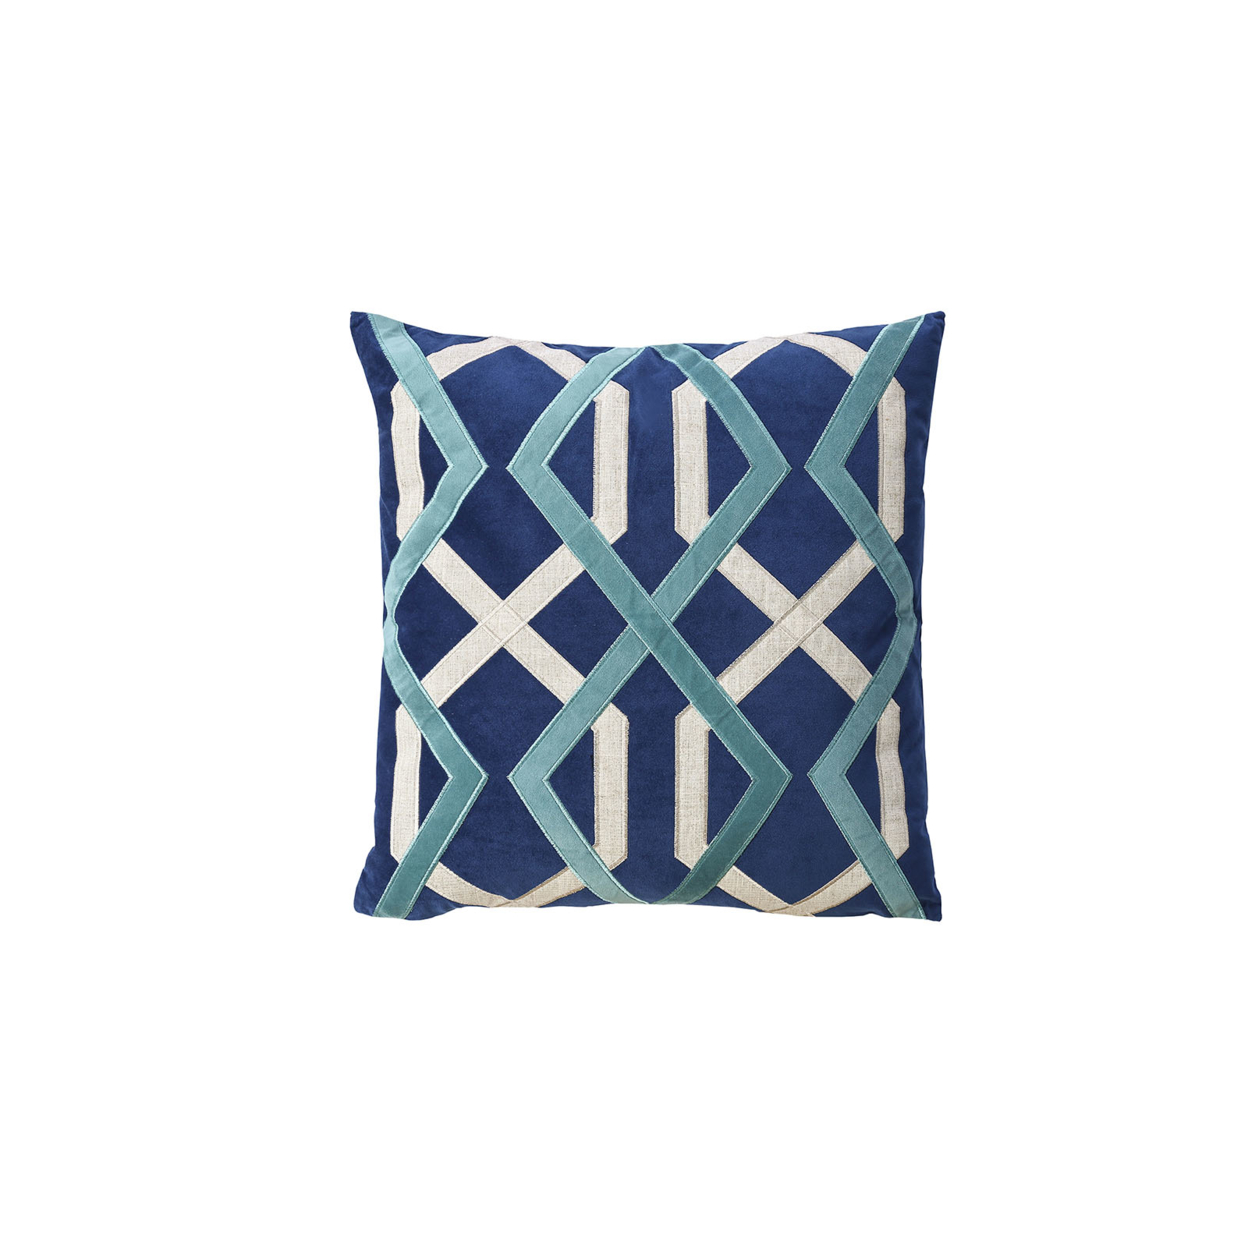 Contemporary Style Set Of 2 Throw Pillows With Geometric Patterns, Blue- Saltoro Sherpi